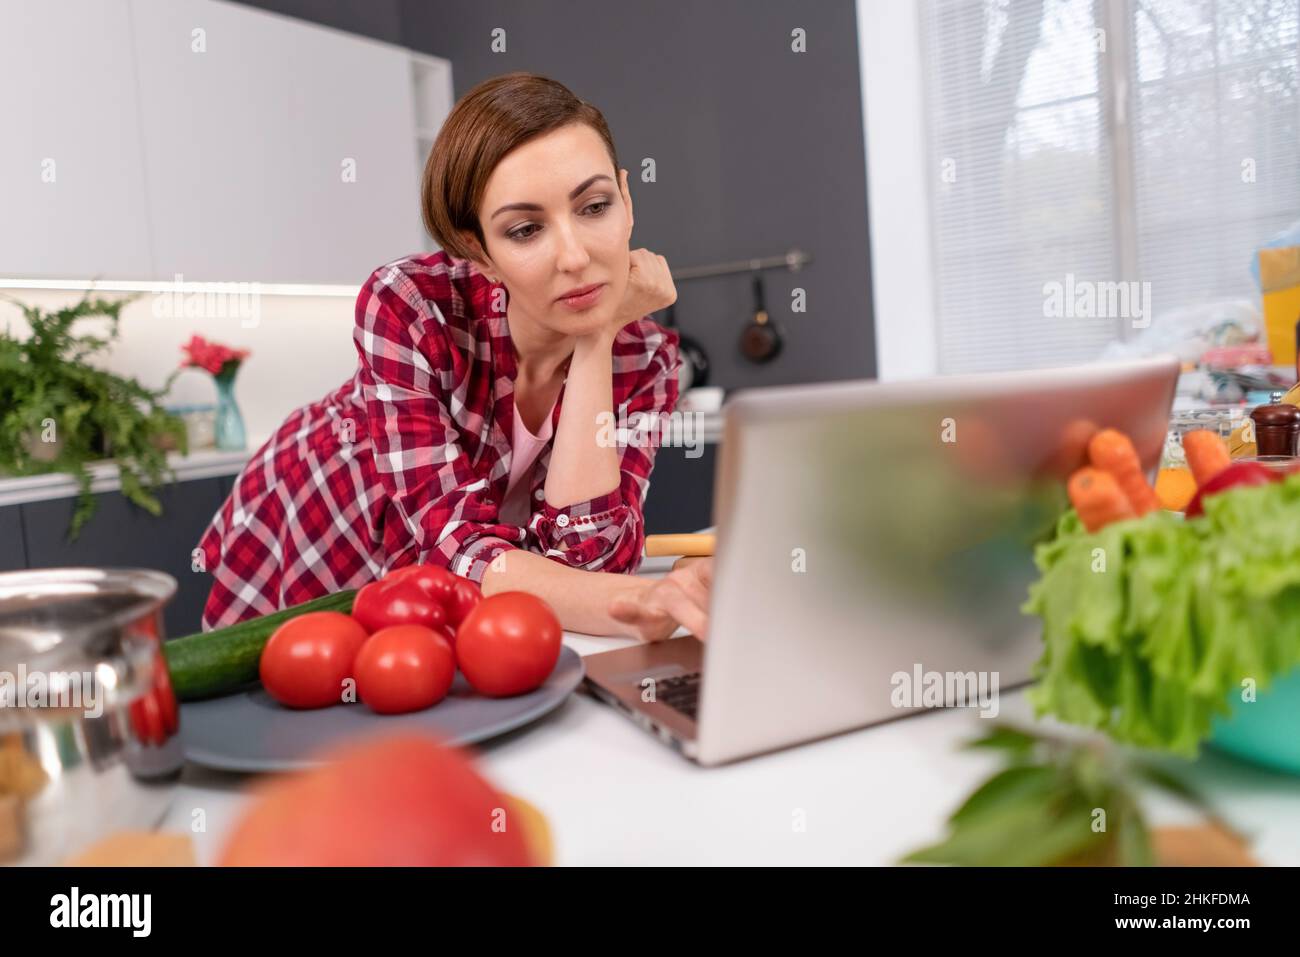 Short haired woman use laptop having video call near fresh vegetables in kitchen. Bored or interested woman uses laptop. Young woman at kitchen searching online for healthy food recipes.  Stock Photo